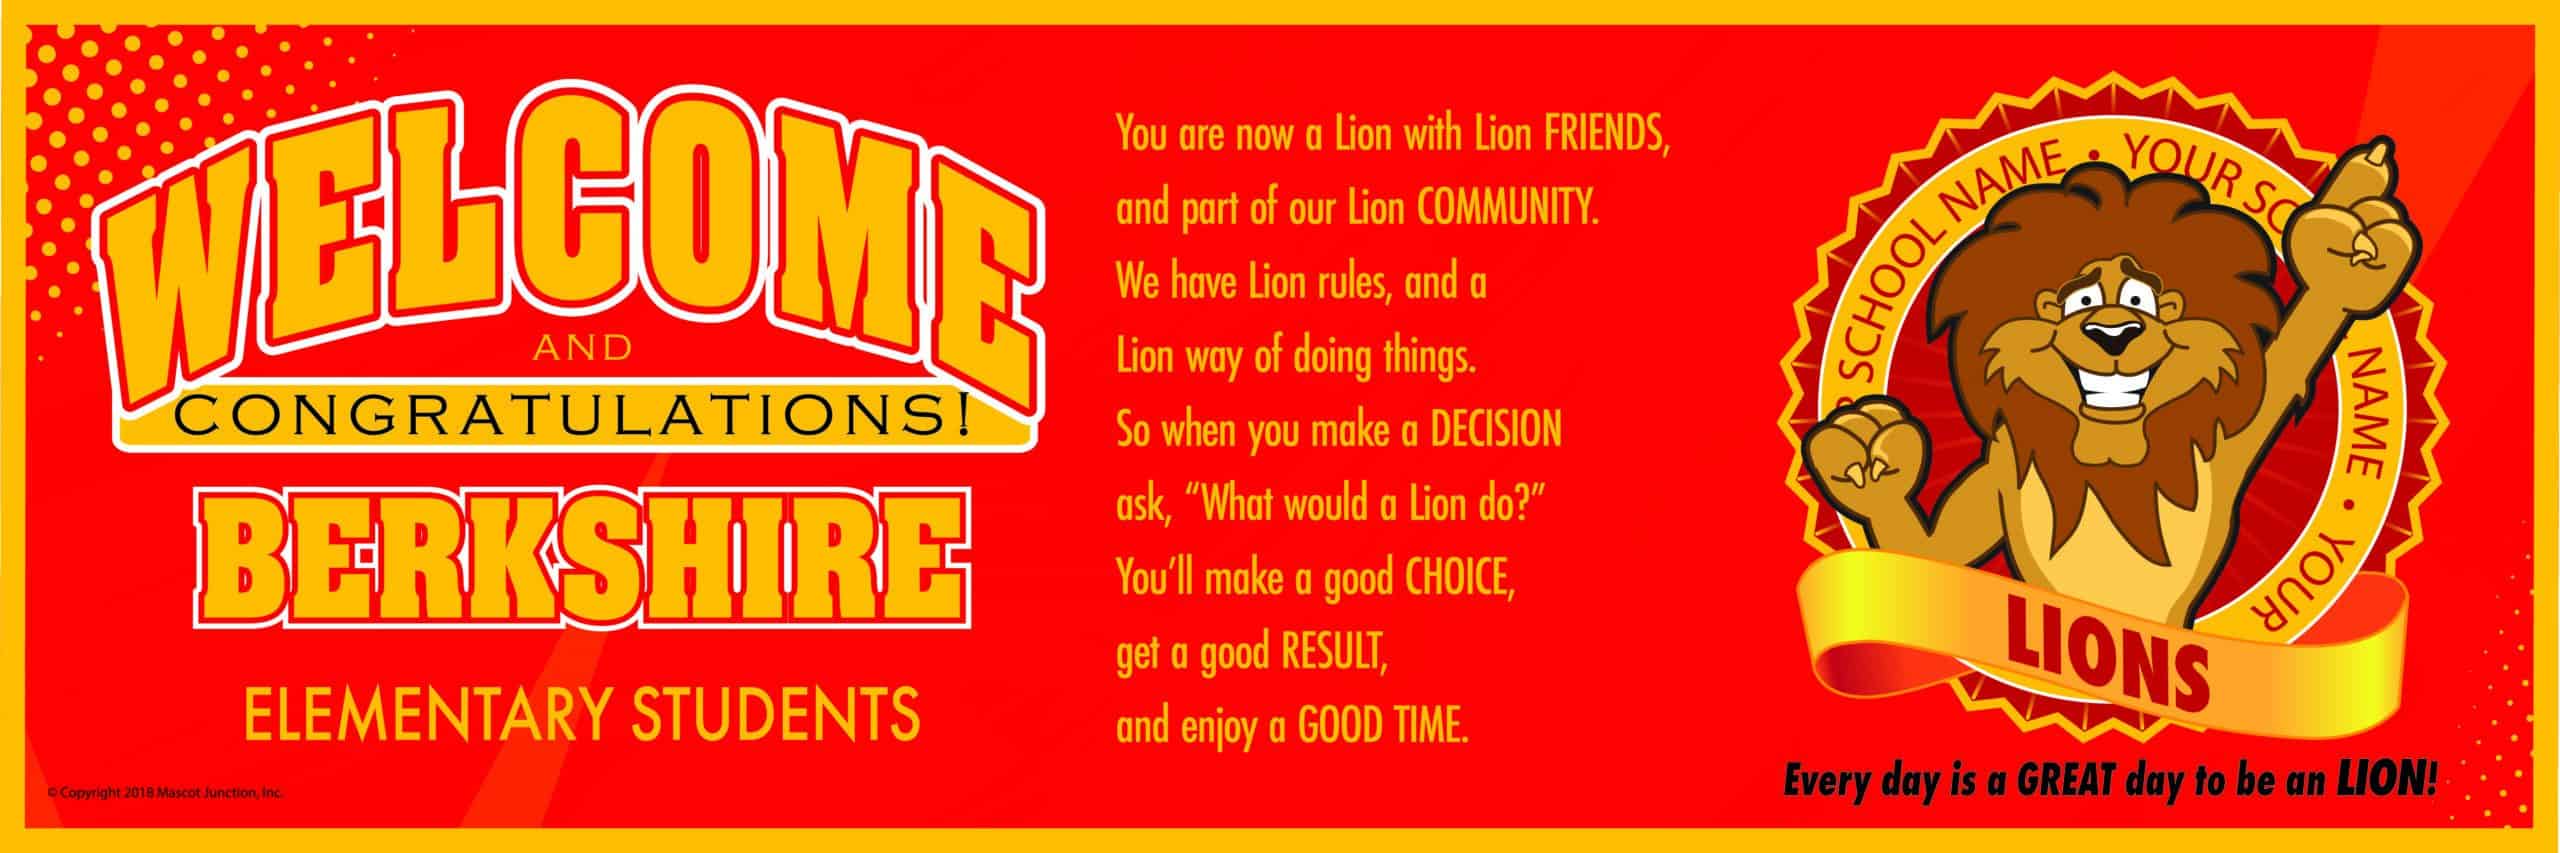 Welcome-Banner-Lion